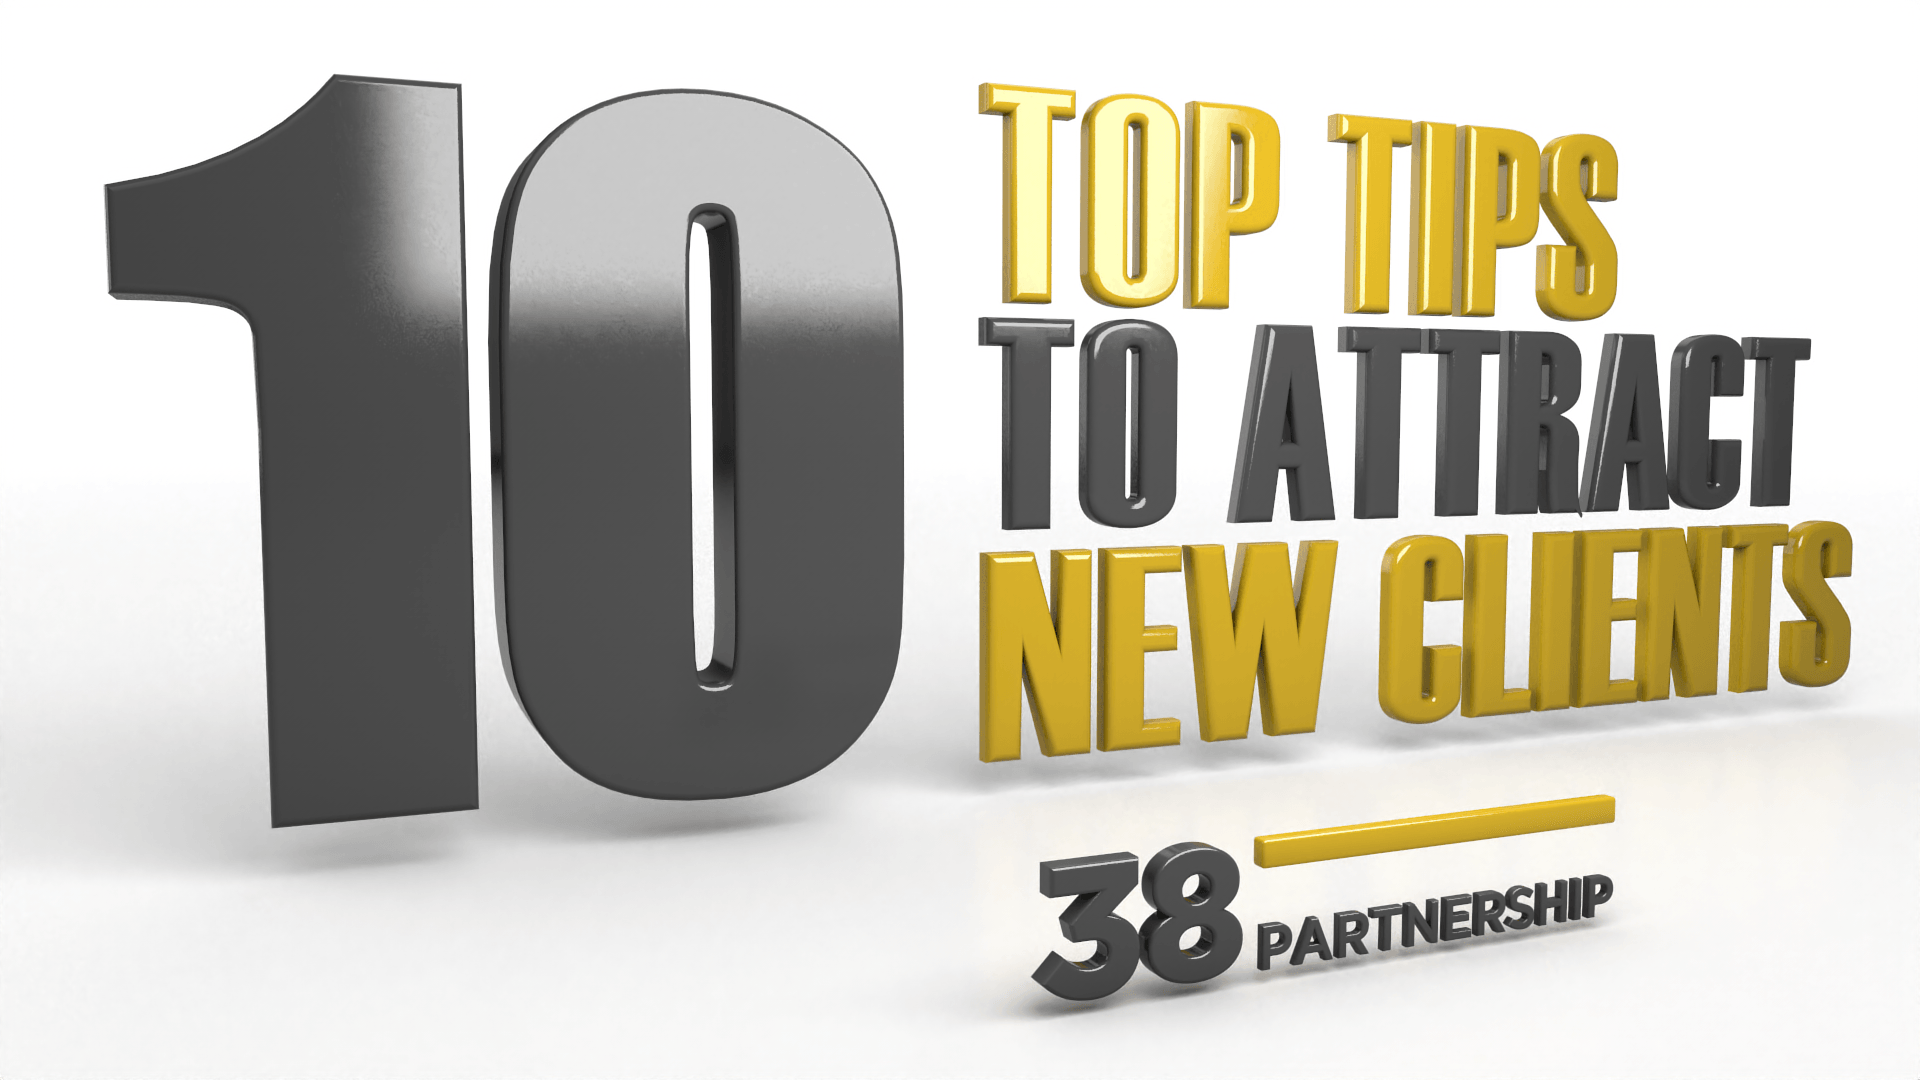 10 Top Tips To Attract New Clients, 38 Partnership